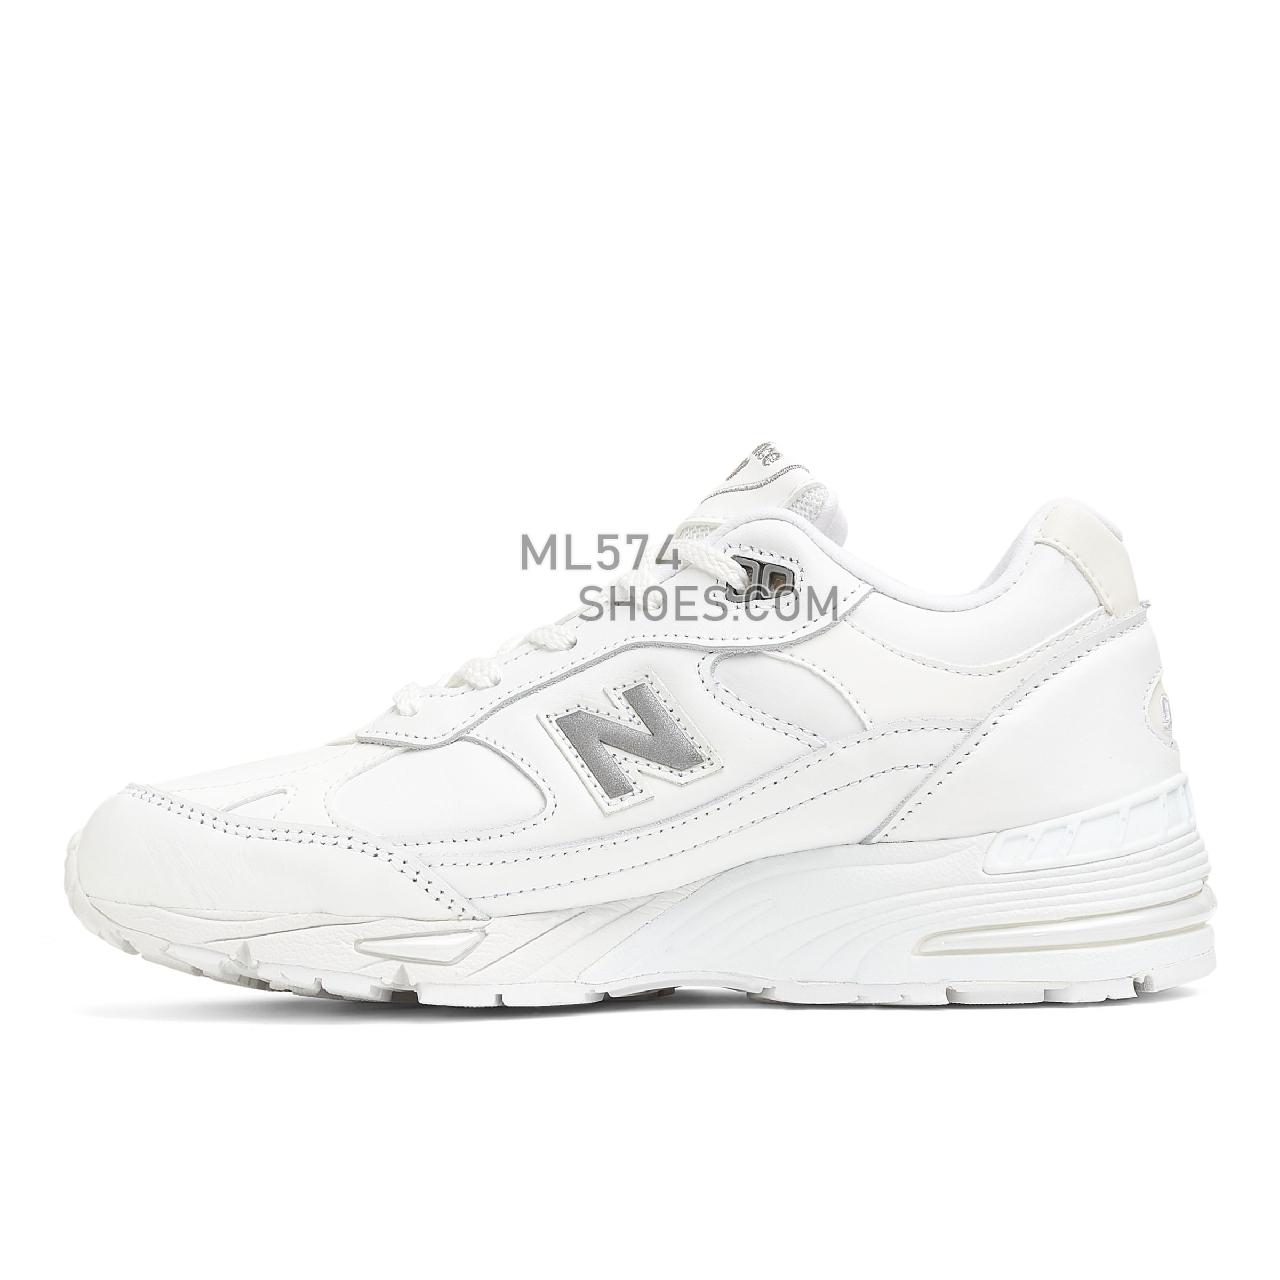 New Balance Made in UK 991 - Women's Made in USA And UK Sneakers - White with Grey - W991TW